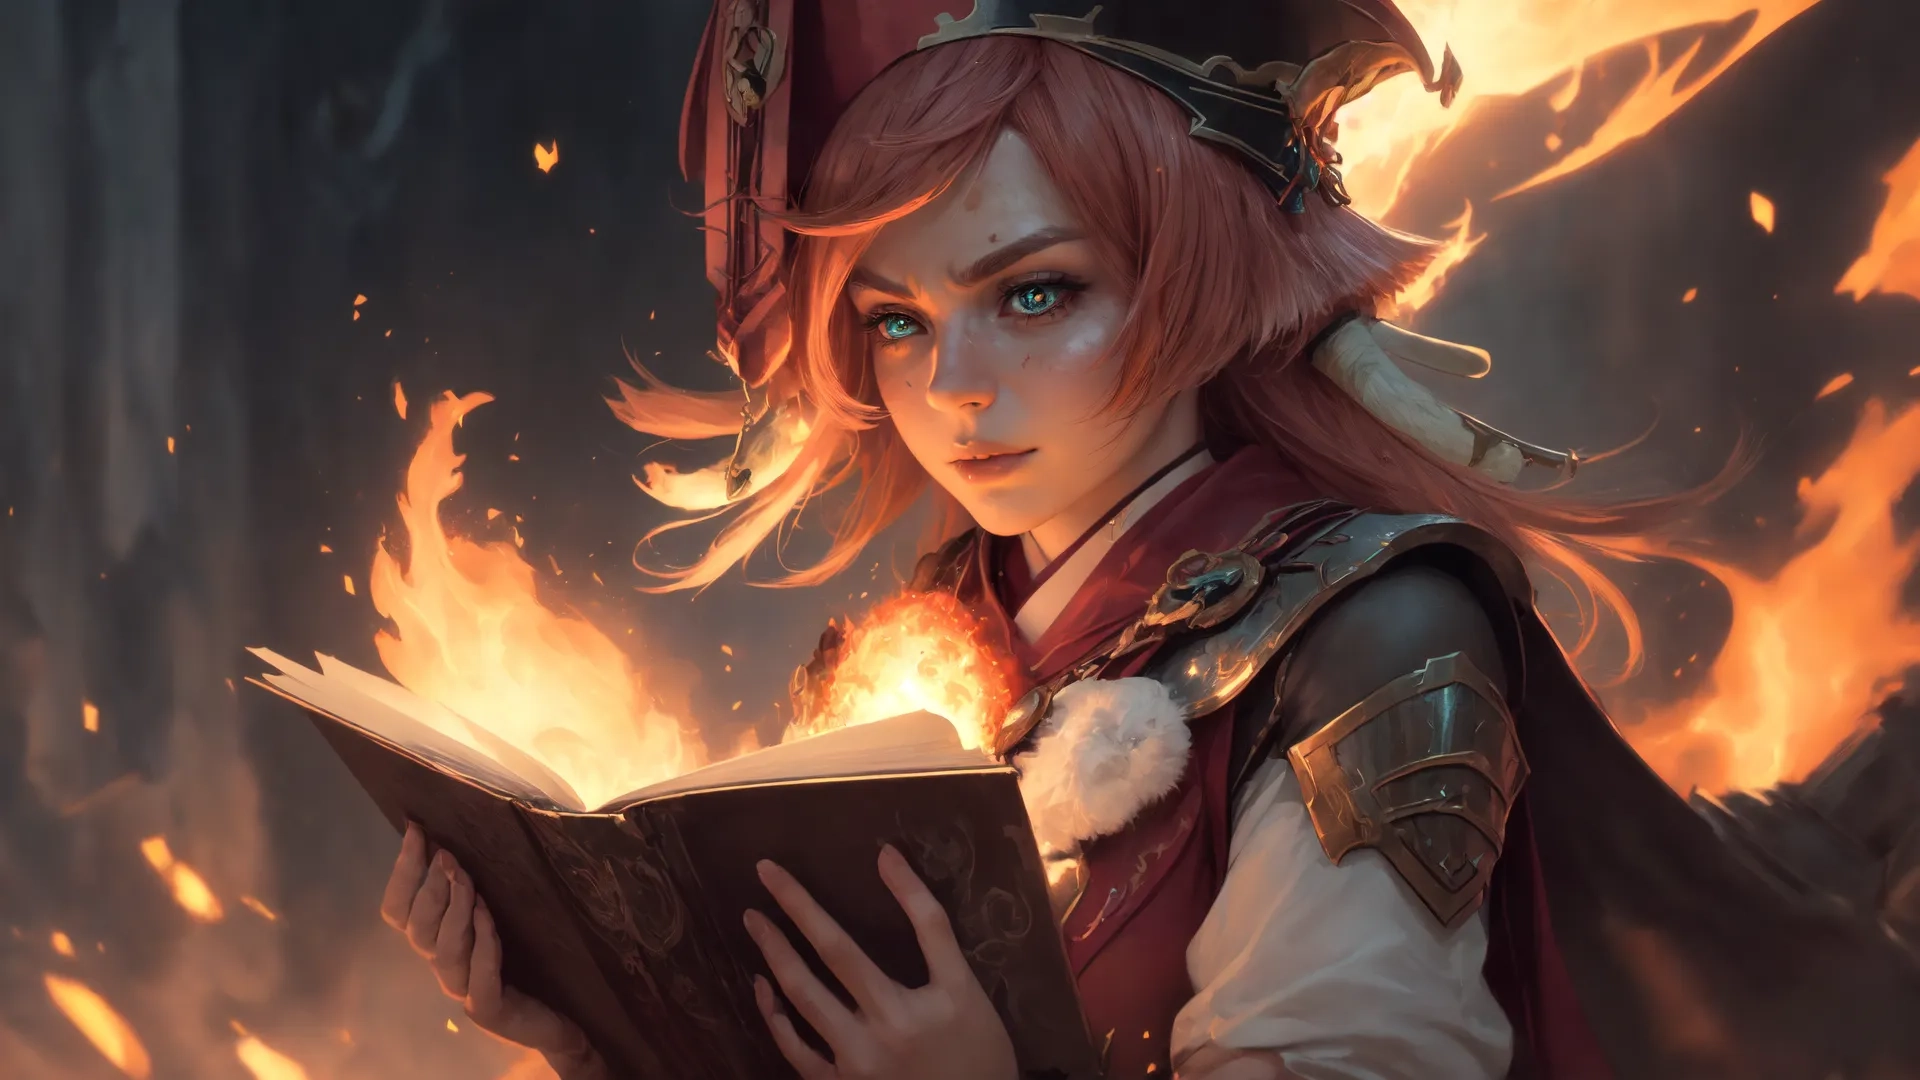 a beautiful young woman holding an open book in front of burning flames, with flames coming out of the pages behind her and she is wearing a red
